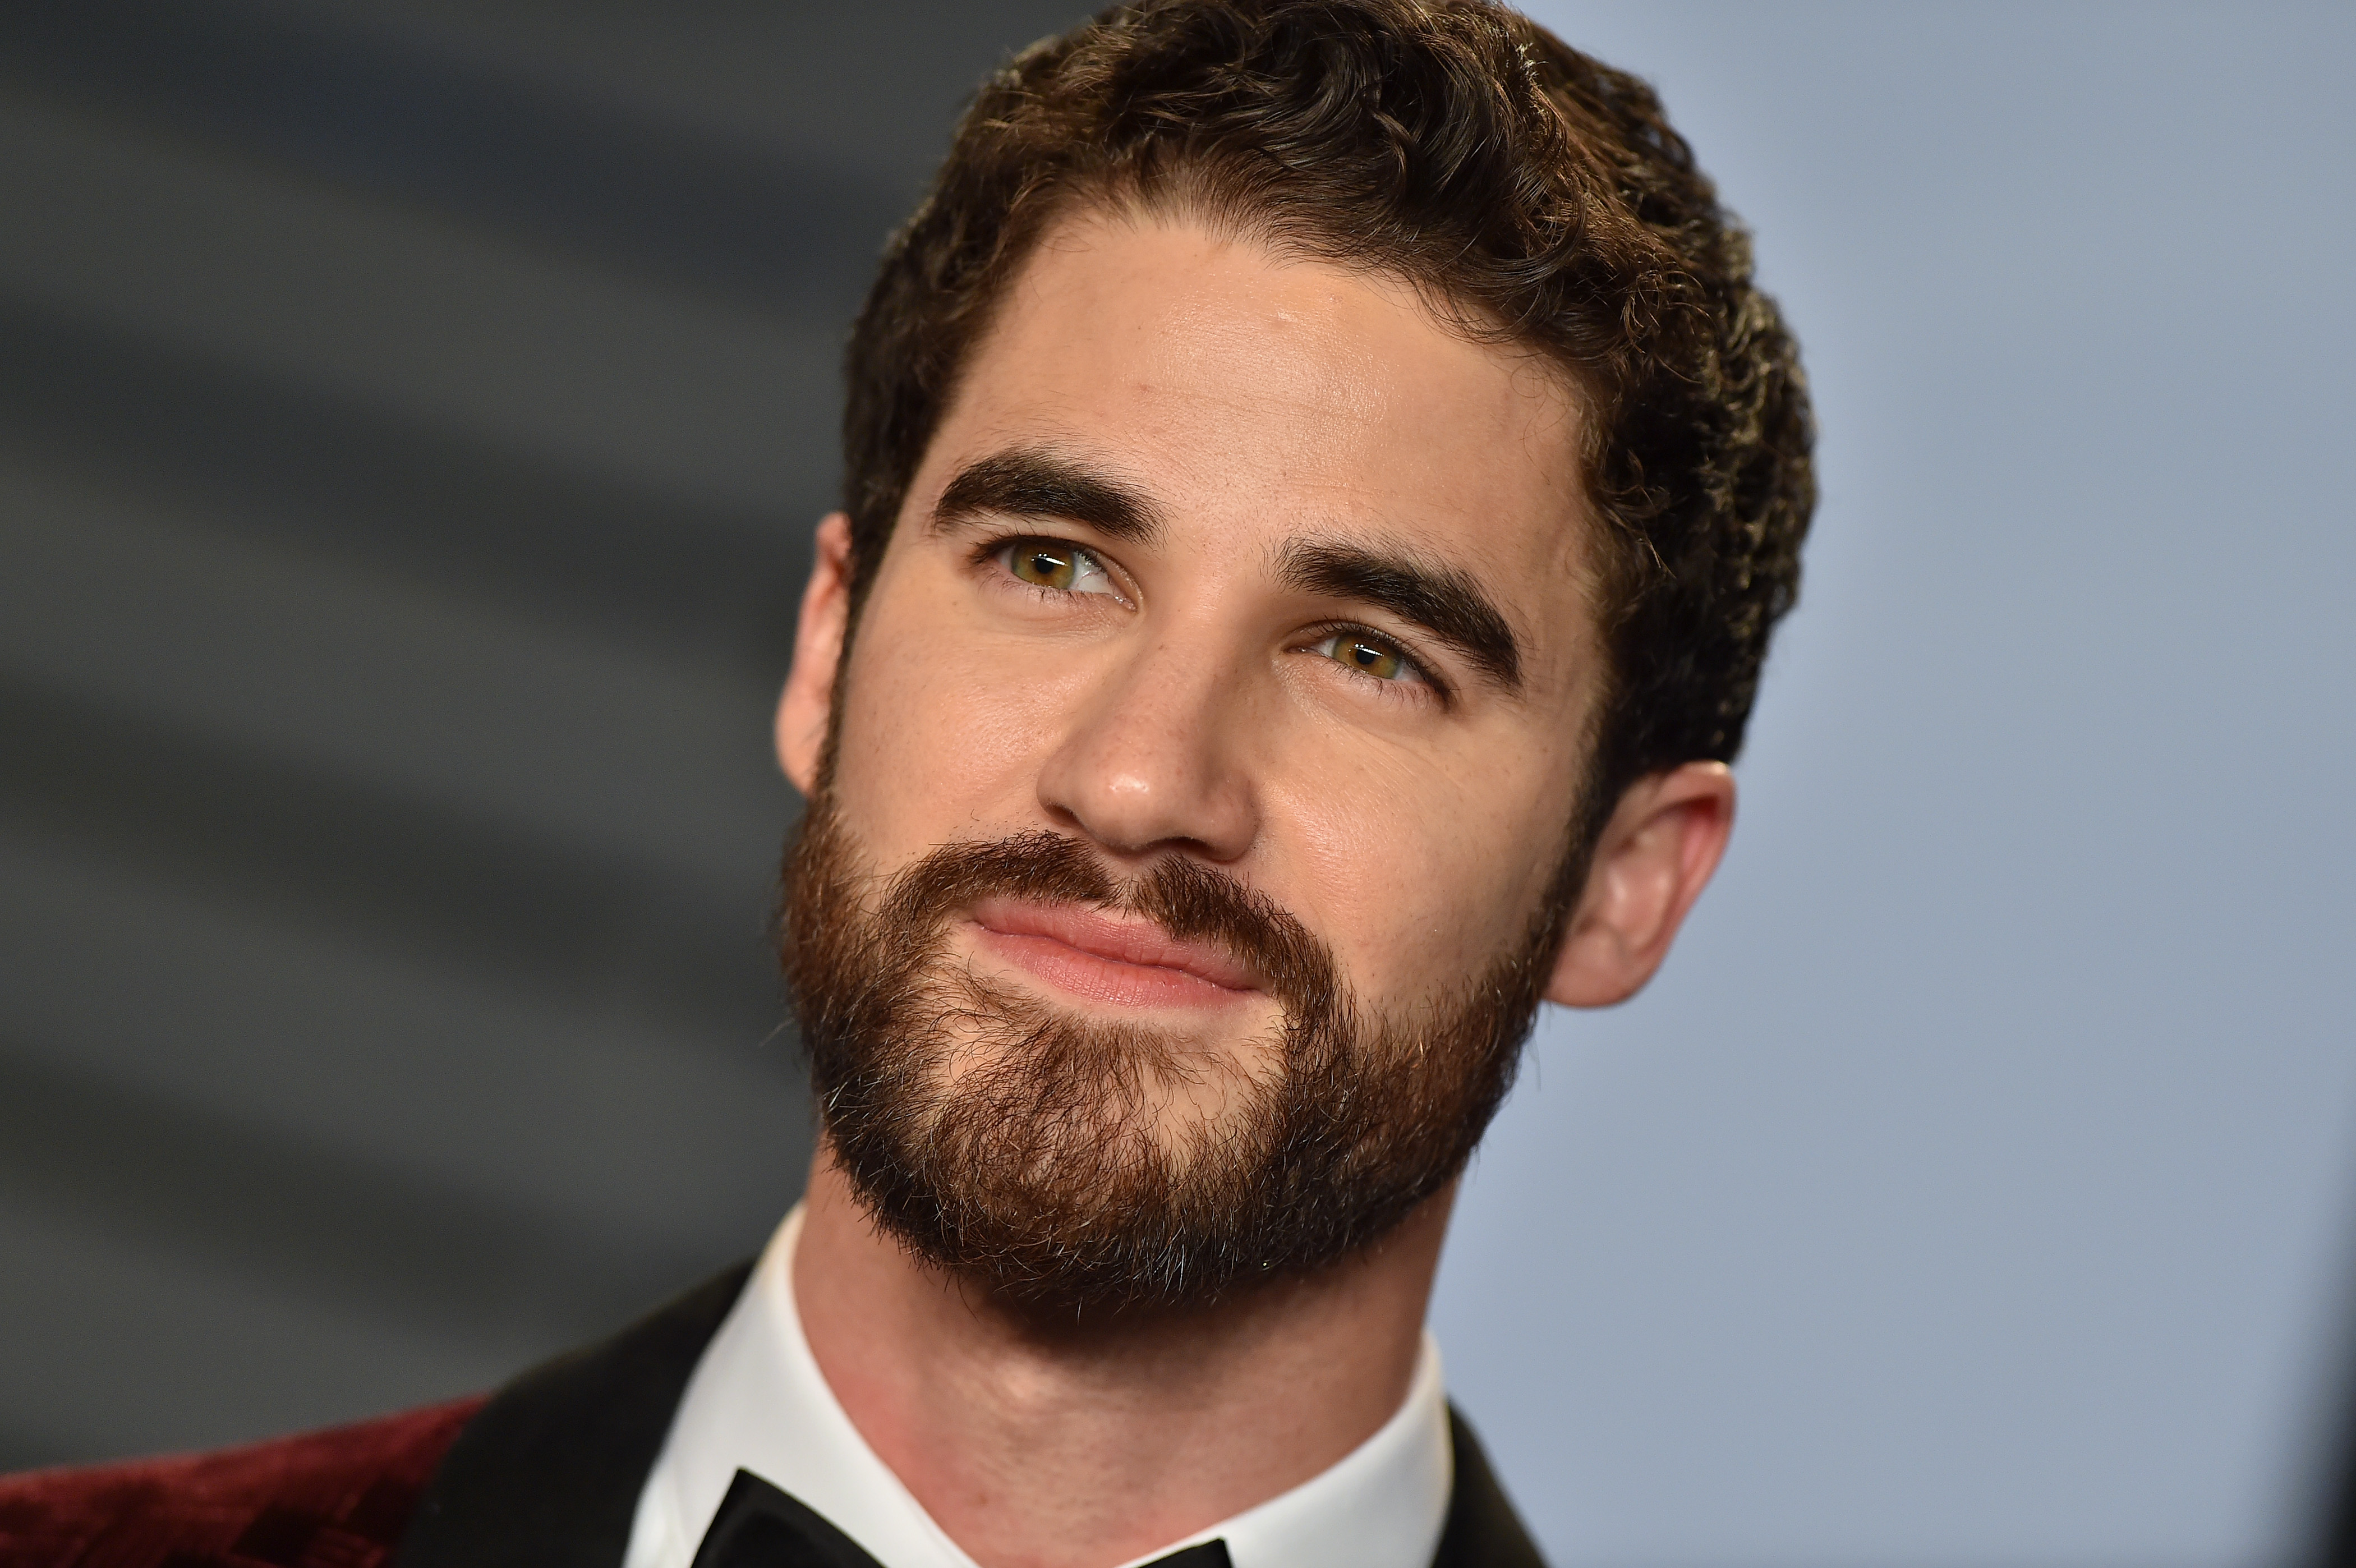 Darren Criss Opens Up His Filipino Background and Passing as White